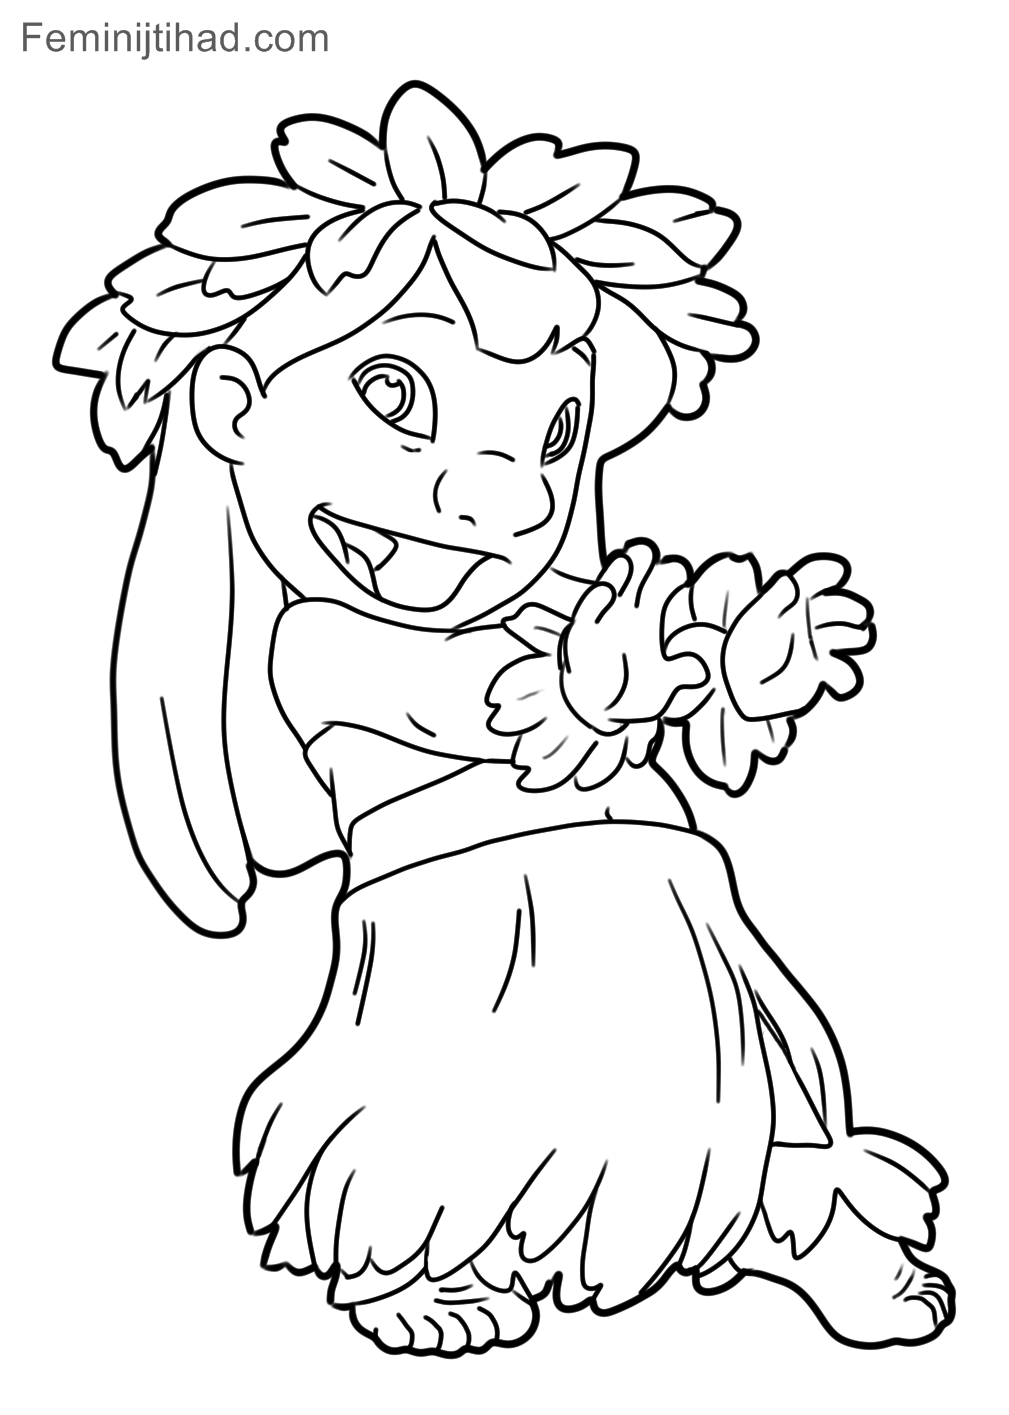 Lilo Coloring Pages at GetColorings.com | Free printable colorings